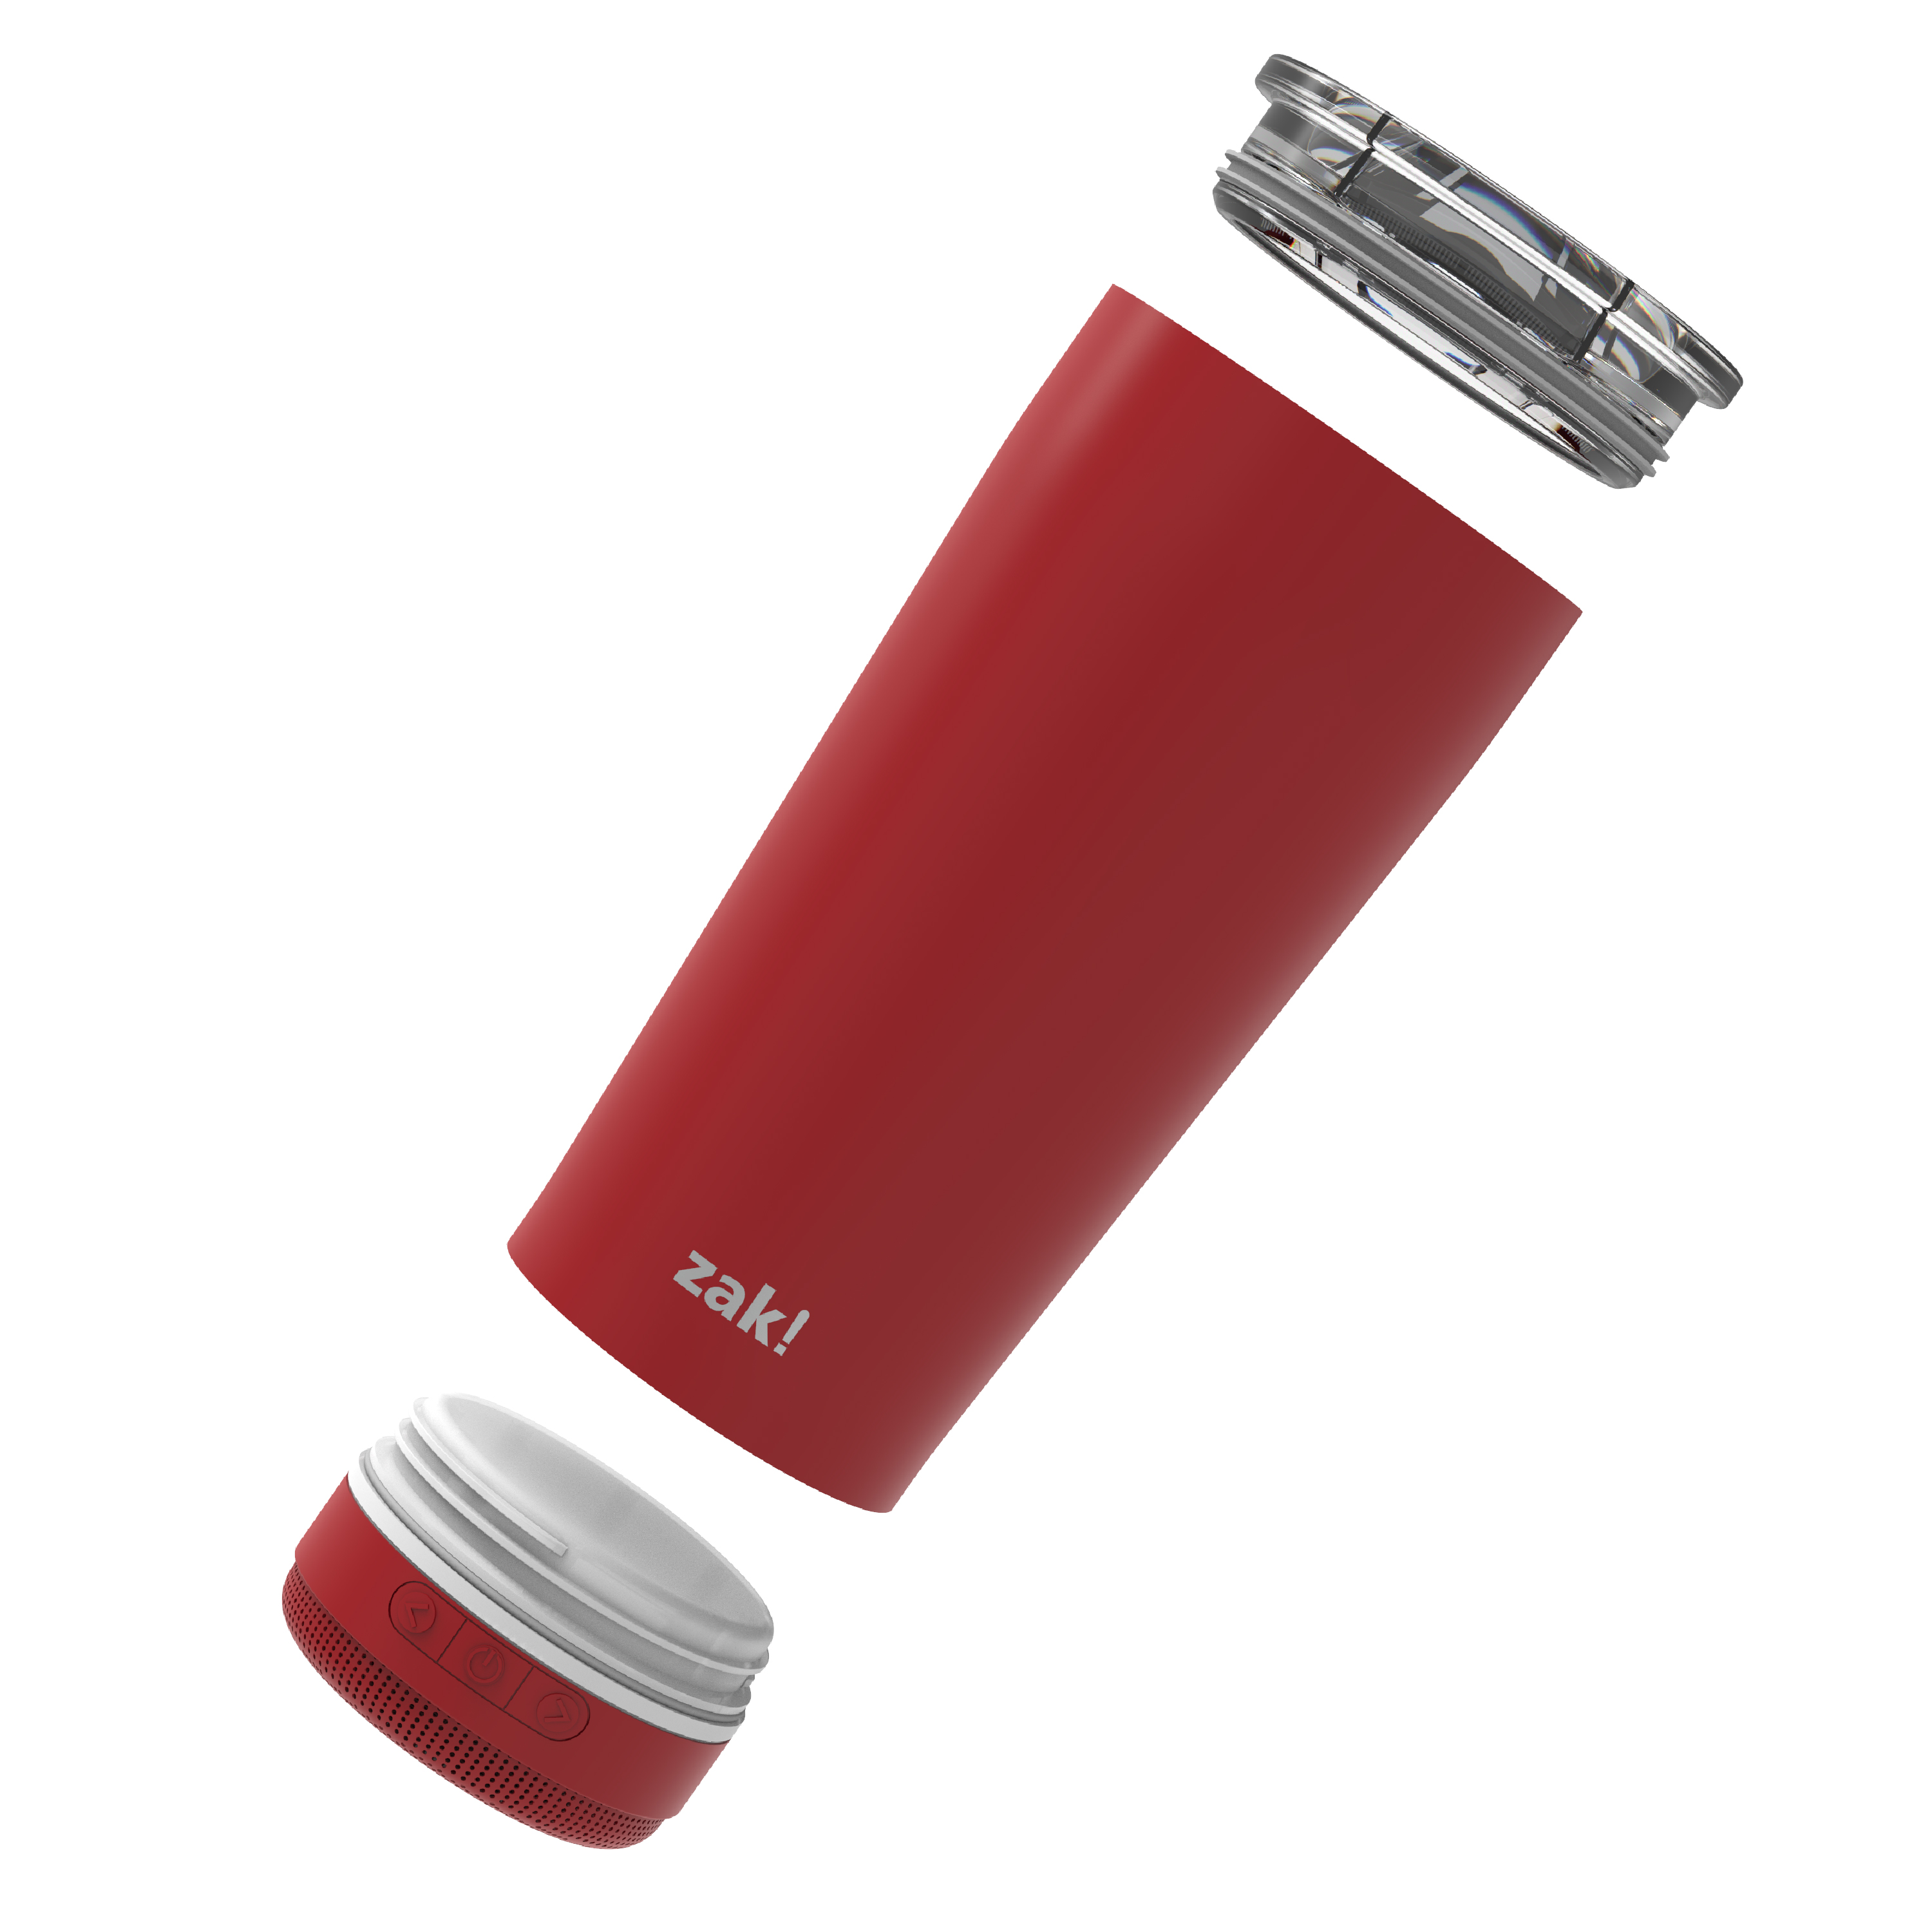 Zak Play 18 ounce Stainless Steel Tumbler with Bluetooth Speaker, Red slideshow image 5